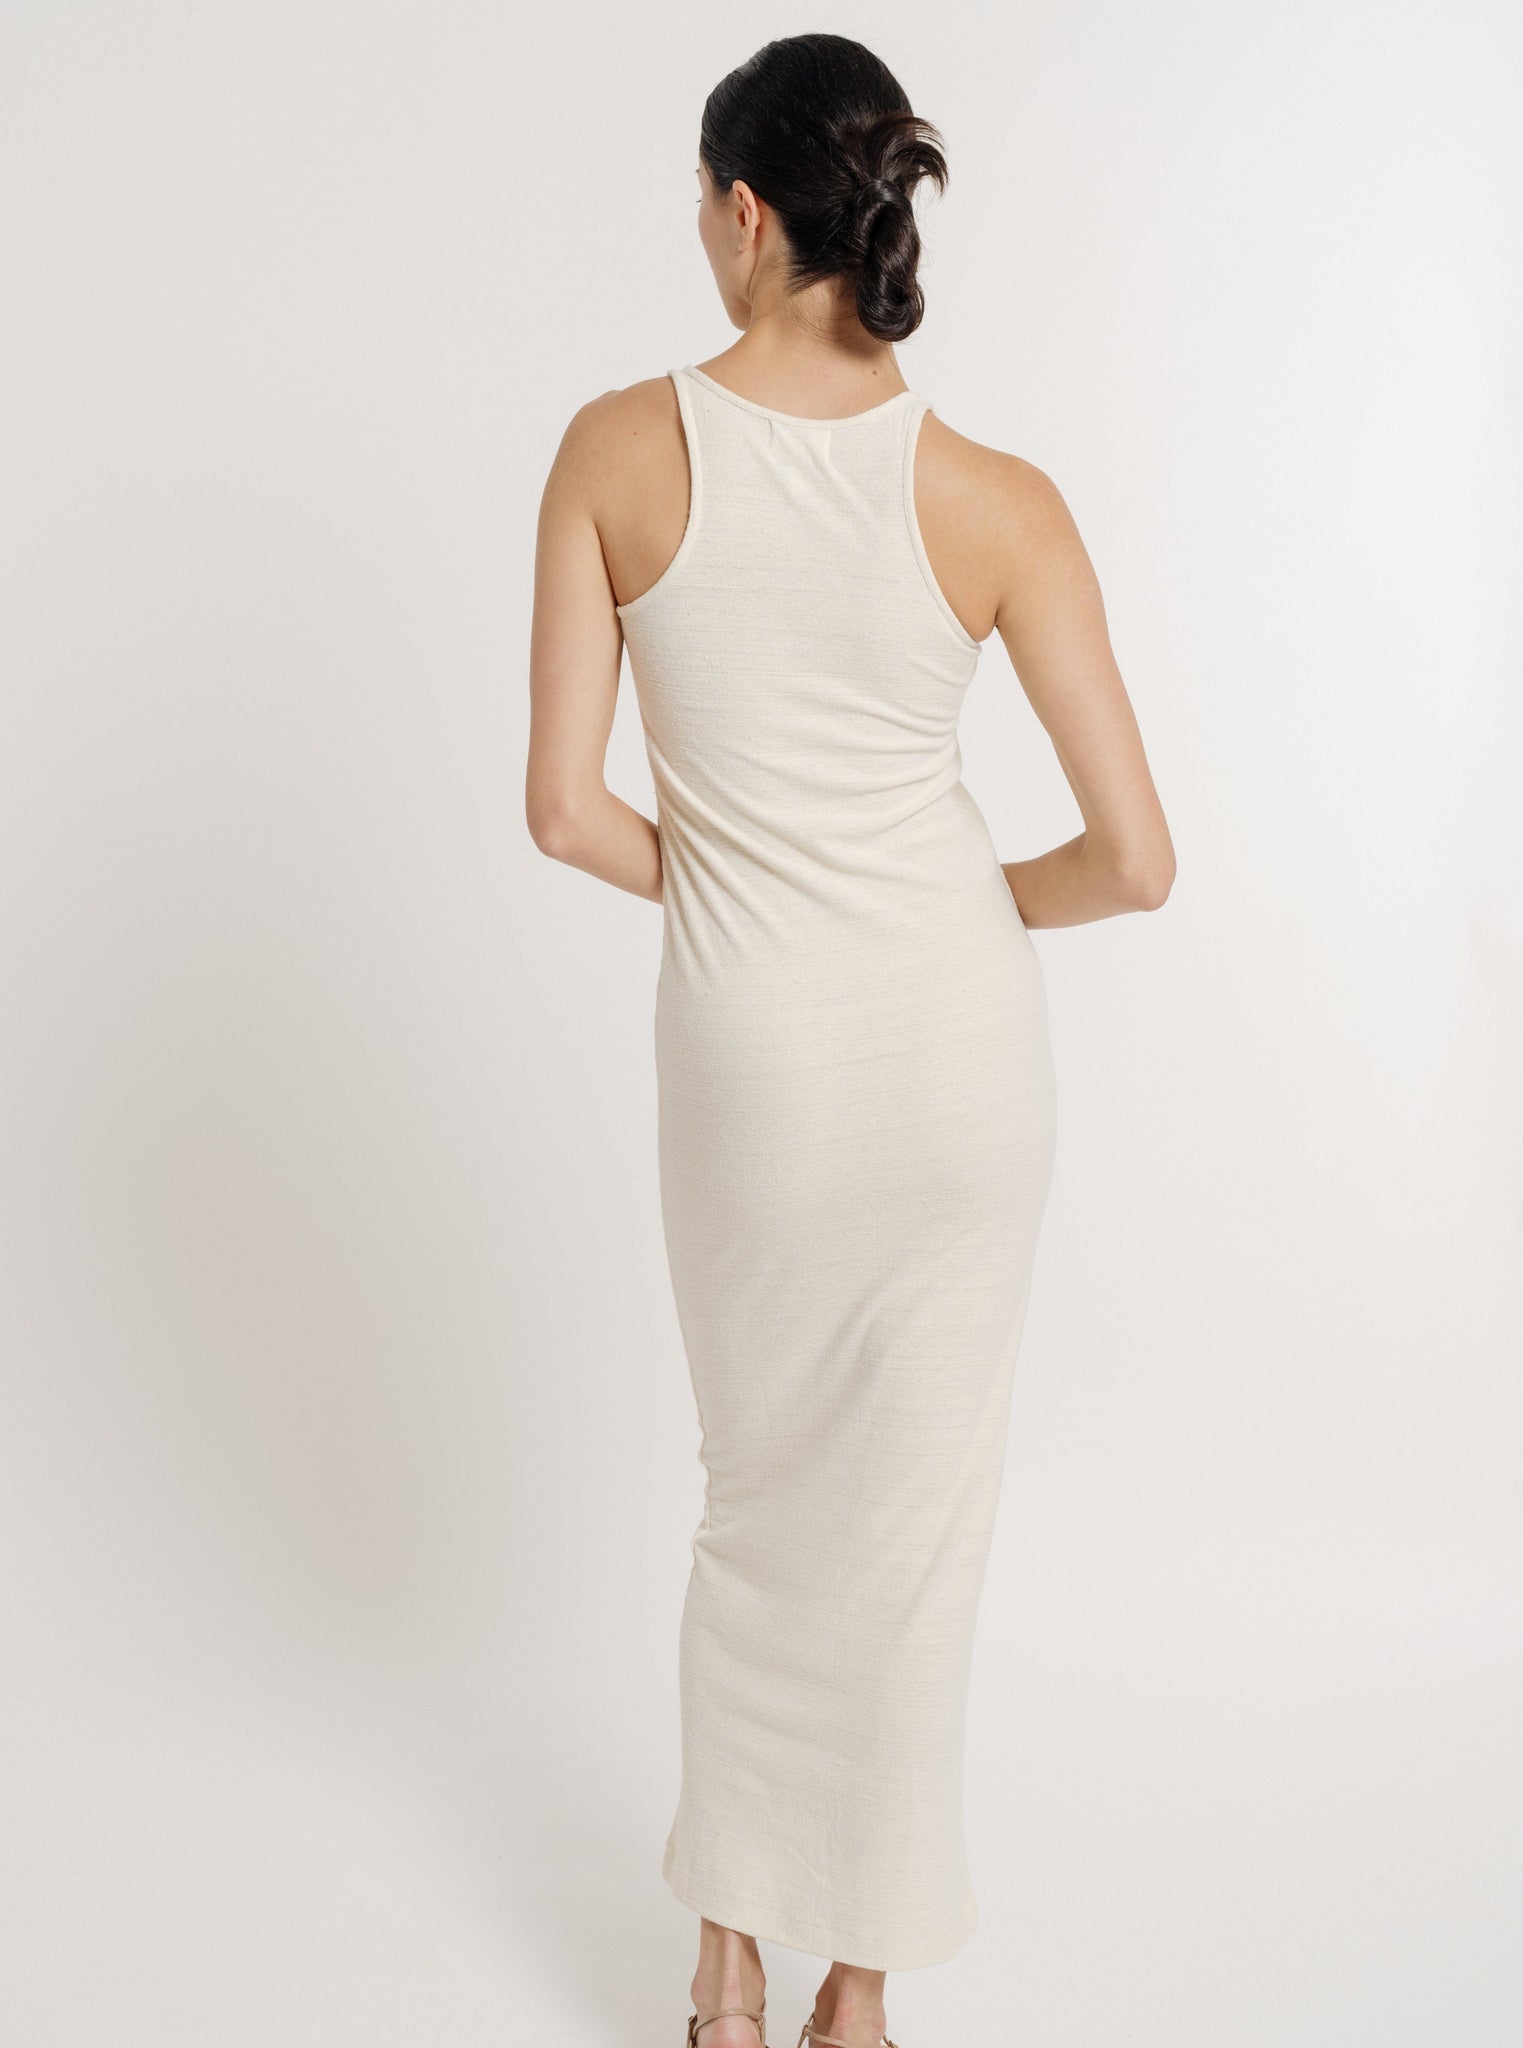 The back view of a woman wearing a pre-ordered Jersey Knit Tank Dress - Ivory Silk Noil, showcasing her individuality.